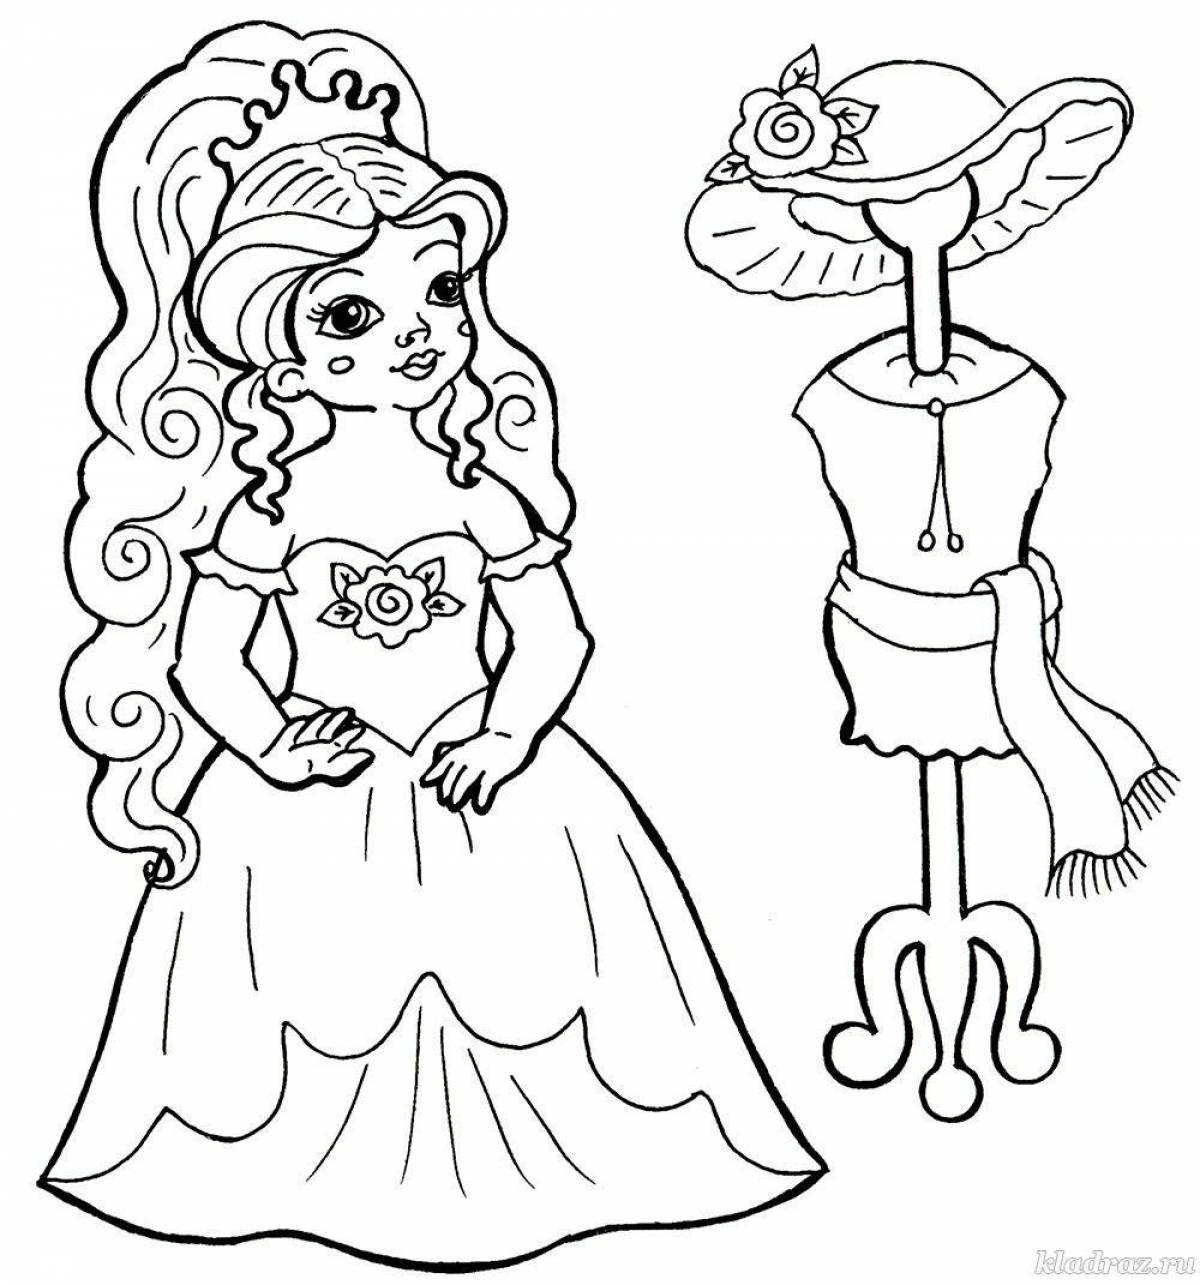 Colorful coloring pages for girls